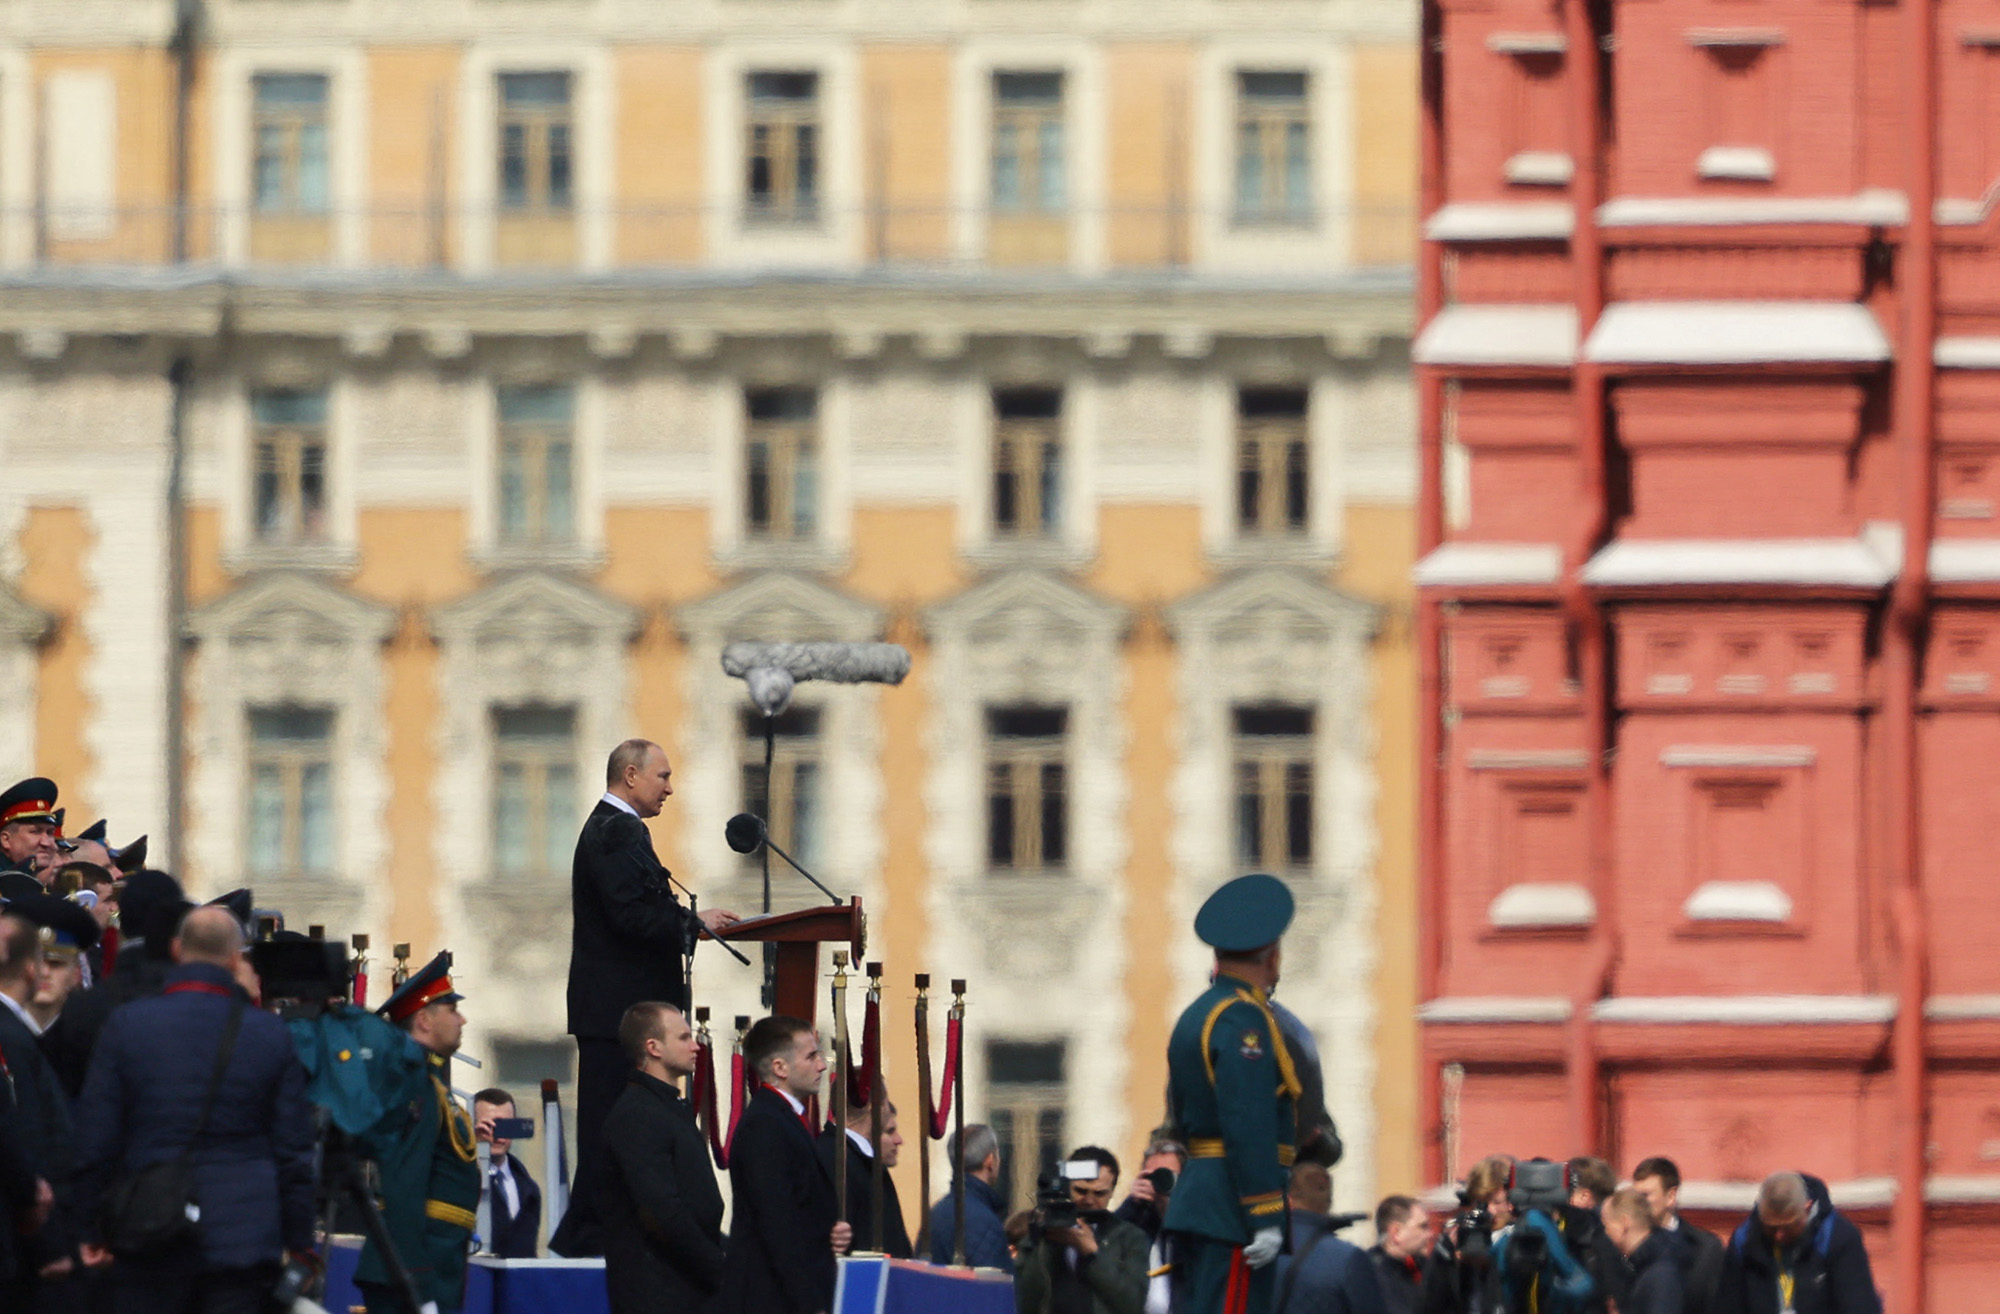 Russian President Vladimir Putin delivers a speech during a military parade on Victory Day, which marks the 77th anniversary of the victory over Nazi Germany in World War Two, in Red Square in central Moscow, Russia, on May 9.